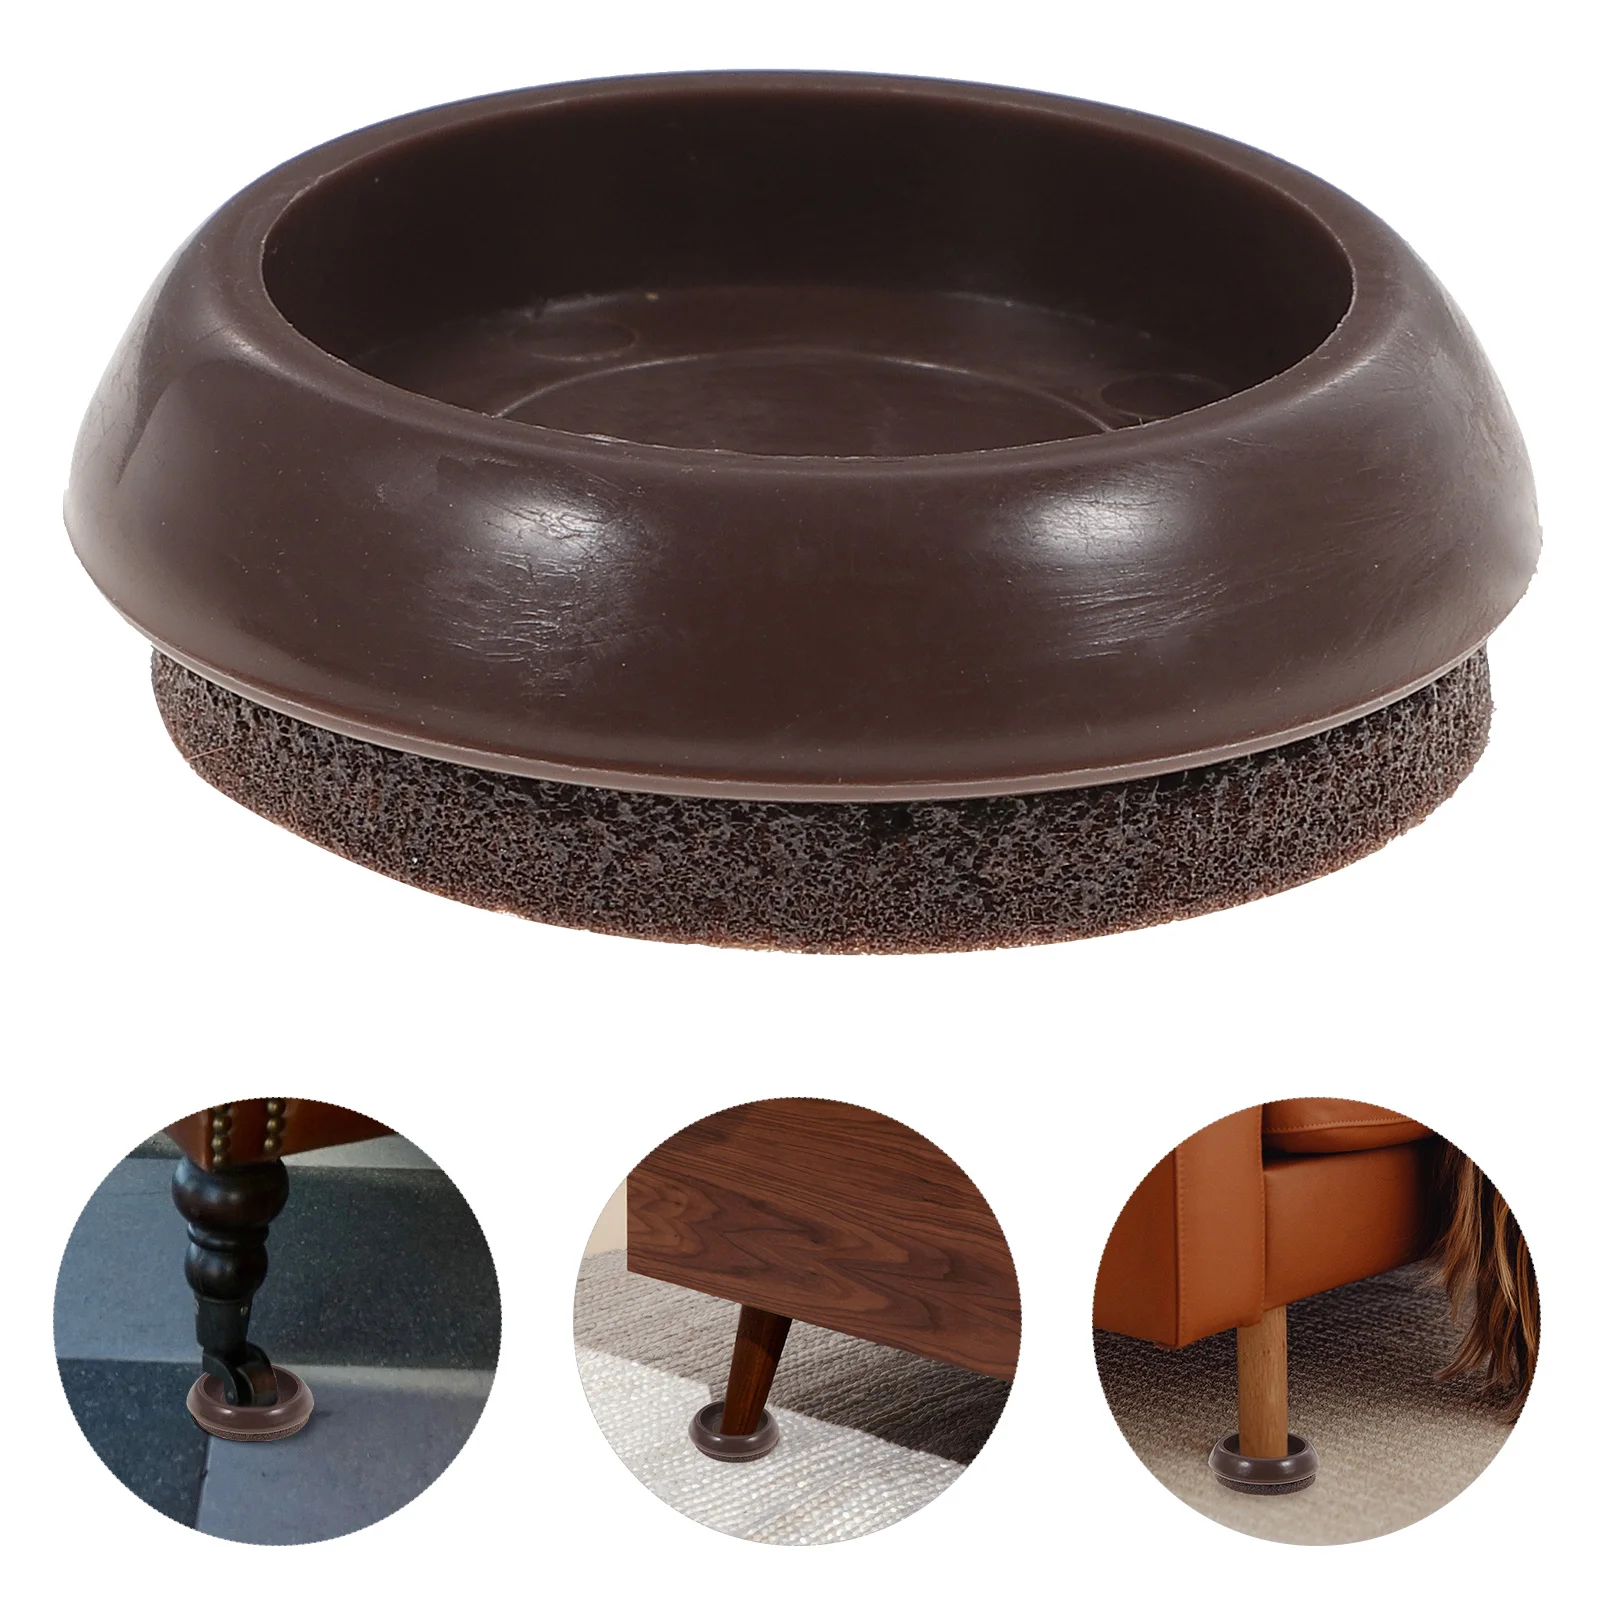 

10 Pcs Fixed Caster Cup Felt Furniture Pads Plastic Rugs Legs Floor Protector Chair Stoppers Hardwood Protectors Circle